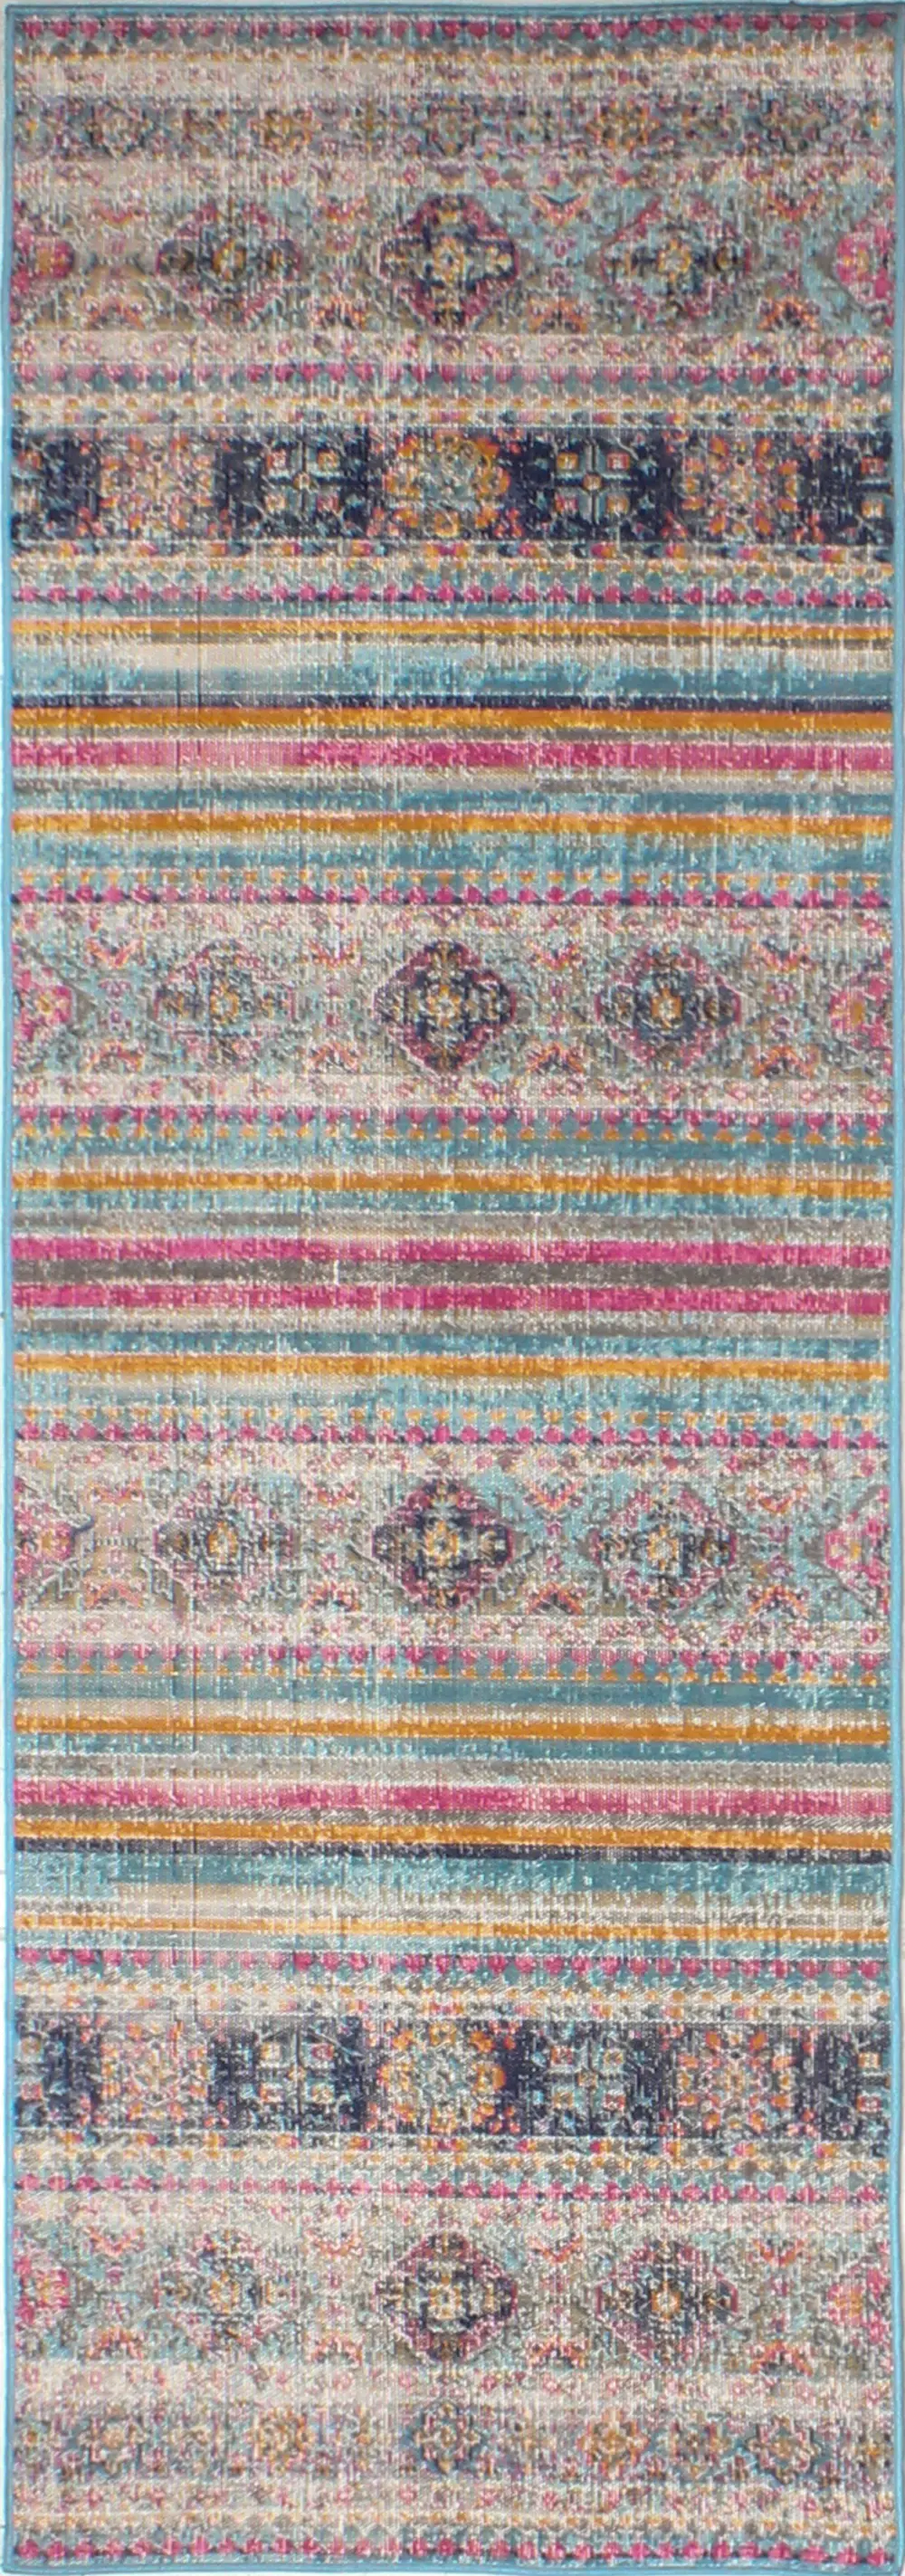 H114-TE-2.6X8-Z041A Traditional Cesar Pink and Blue 8 Foot Runner Rug - Heritage-1